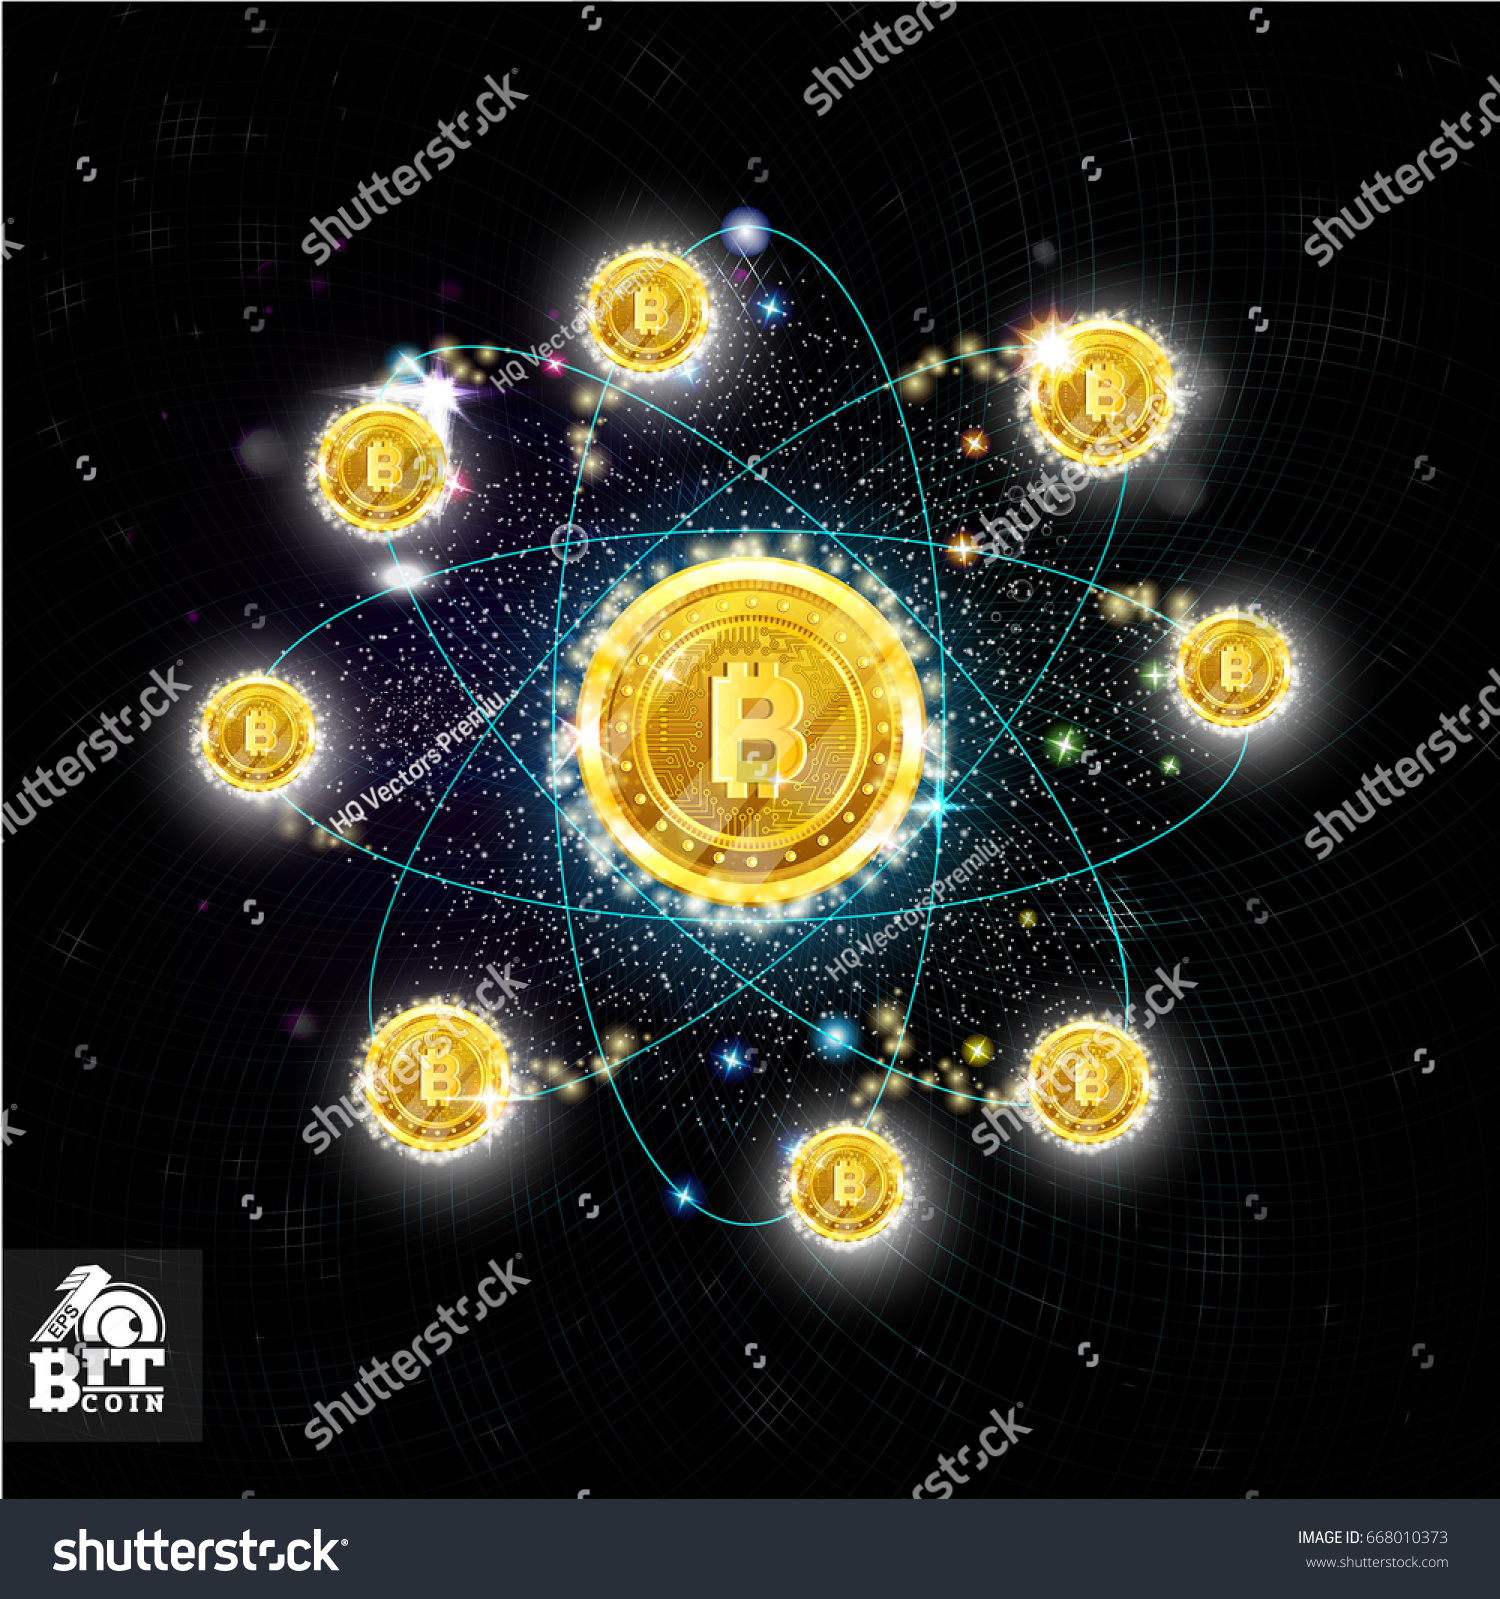 SVG of Dark background with shinny orbits in space with main bit coin in center and small flying around svg